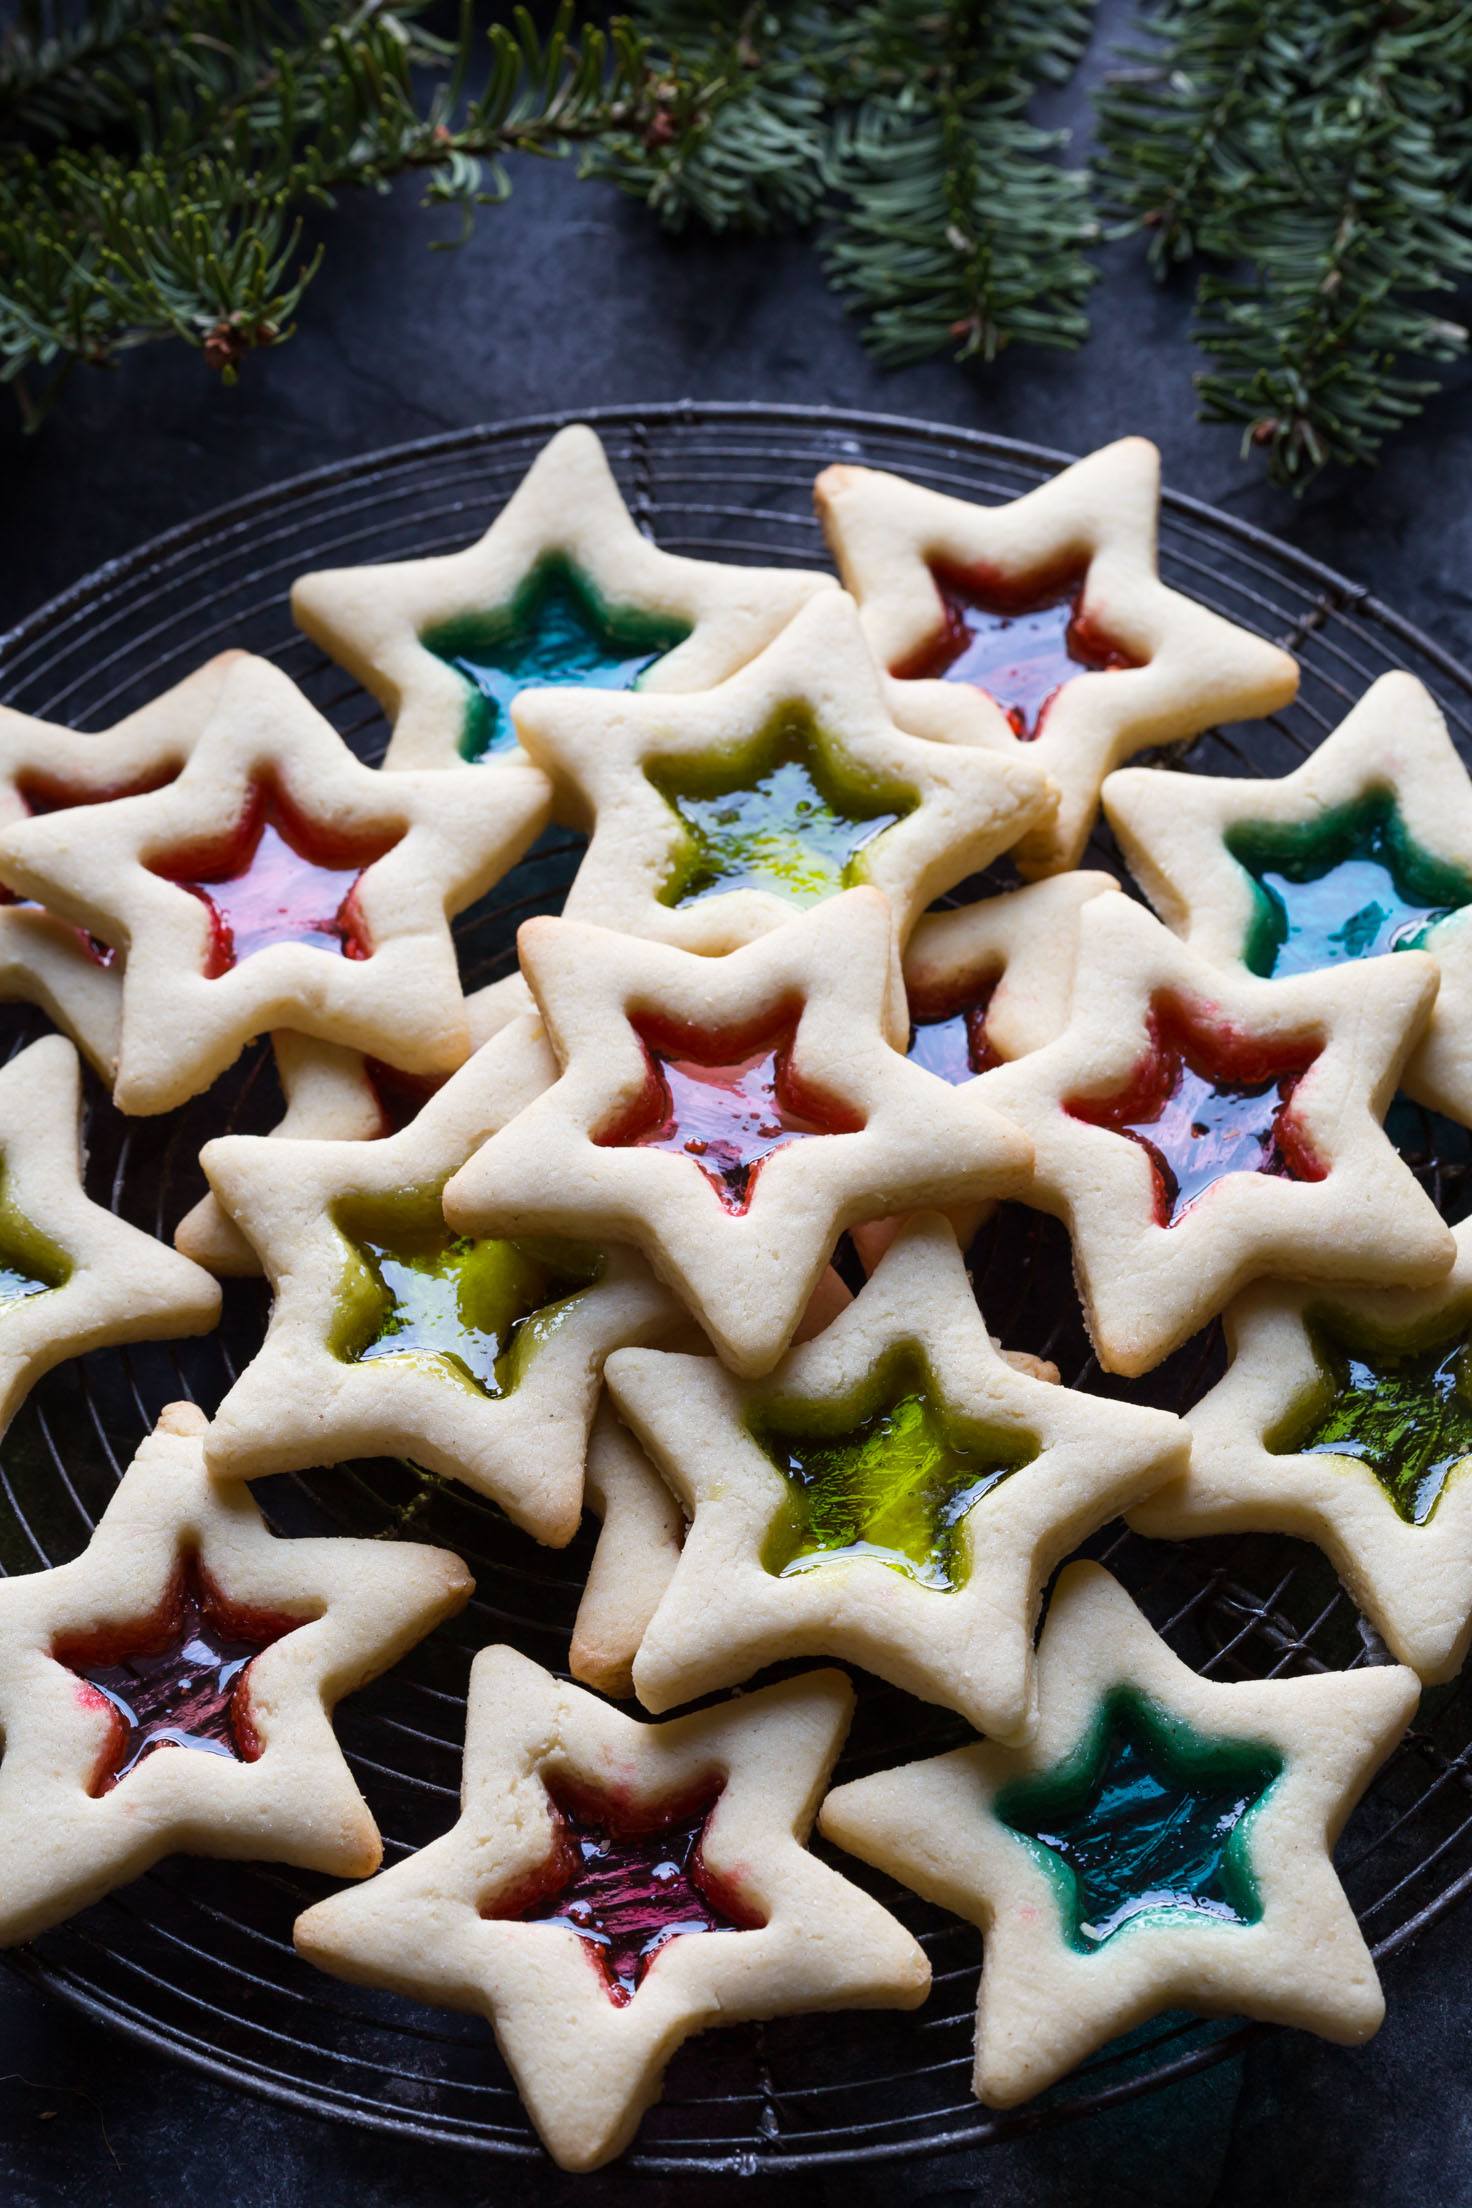 50+ Adorable Christmas Food Ideas For You And Your Loved Ones